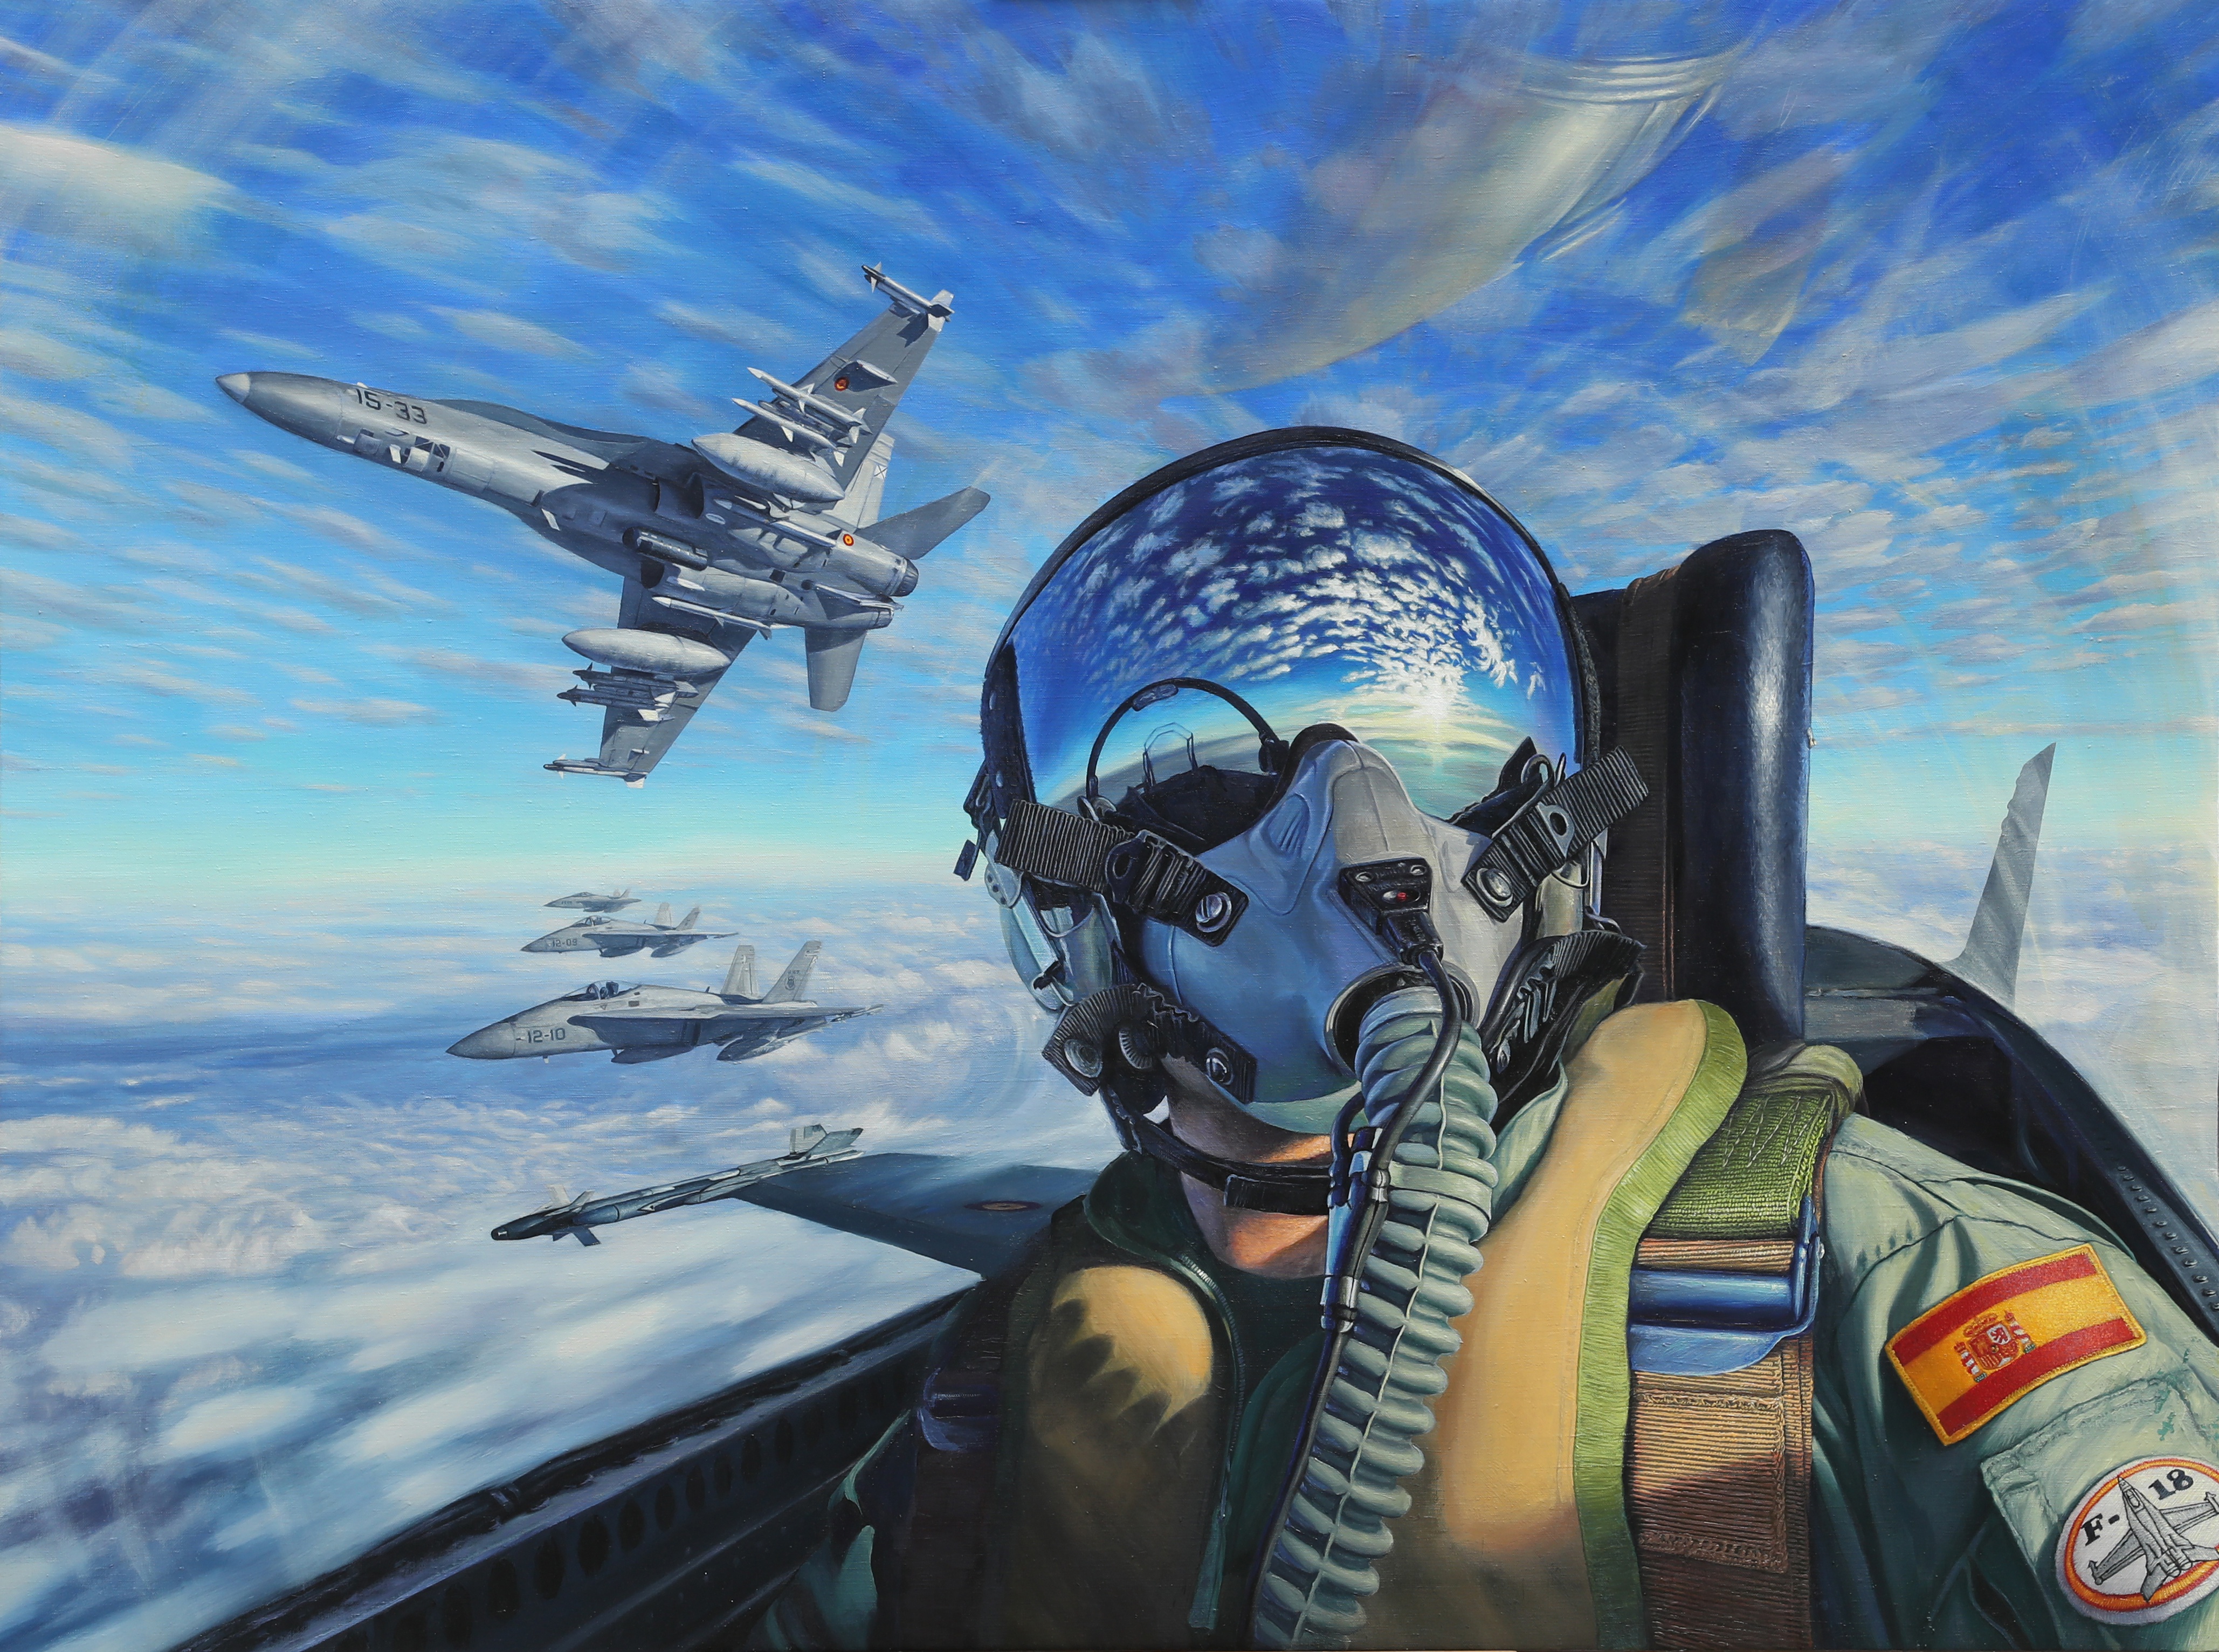 General 4116x3064 military military aircraft Spain flag artwork pilot helmet clouds cockpit flying painting reflection aircraft McDonnell Douglas F/A-18 Hornet Spanish Air Force fighter pilot outfit flight helmet selfies jet fighter